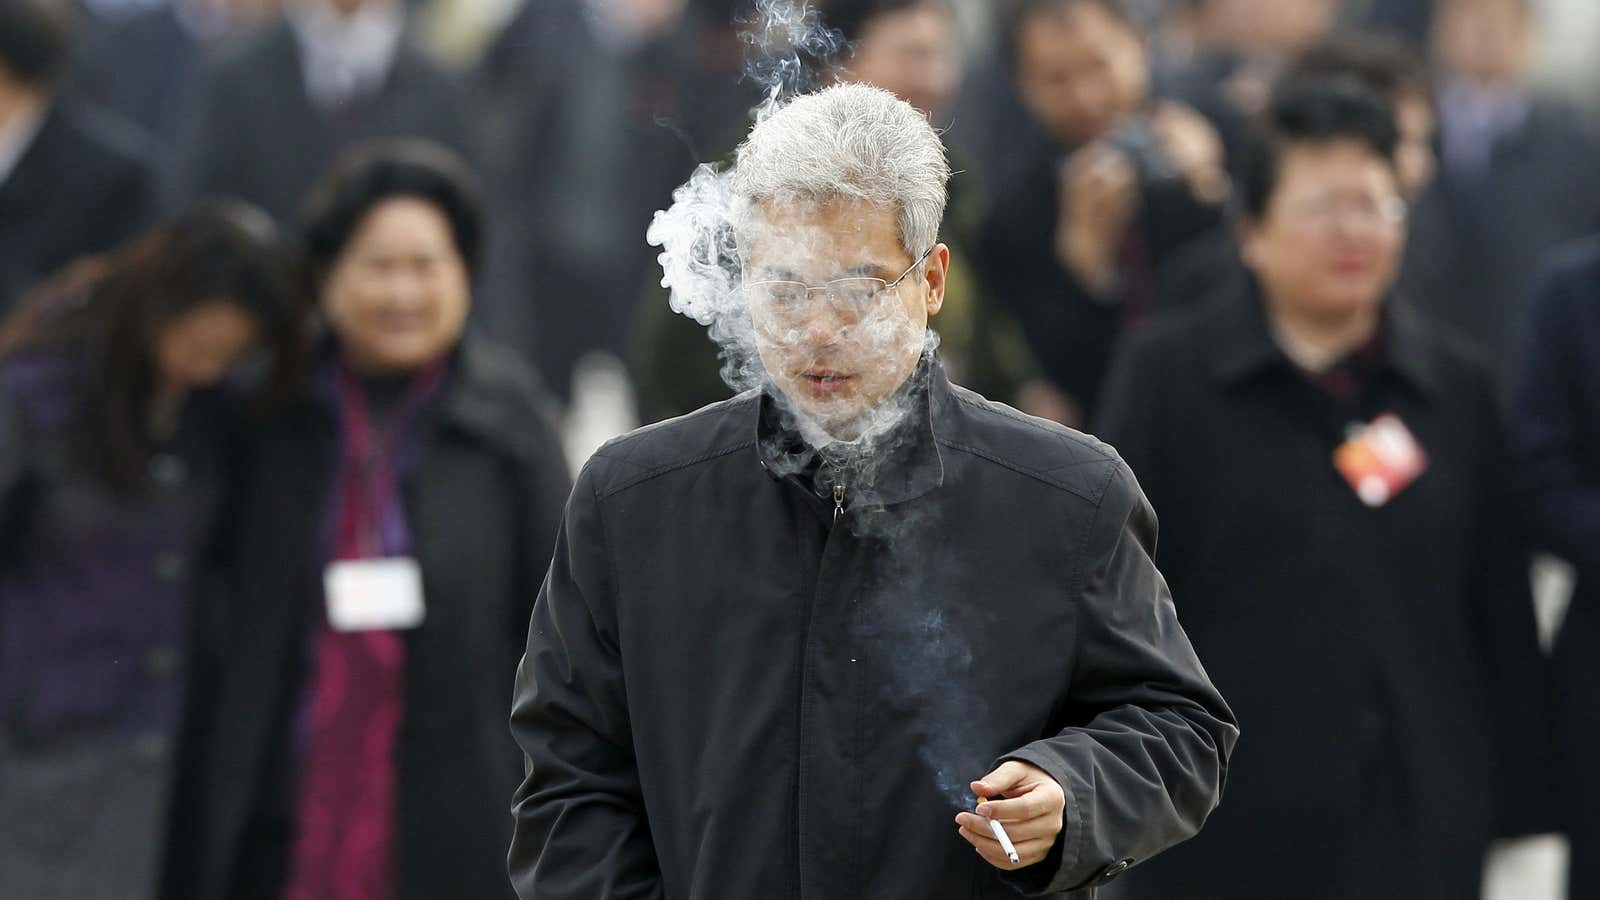 Some 320 million people in China enjoy filling their heads with smoke.